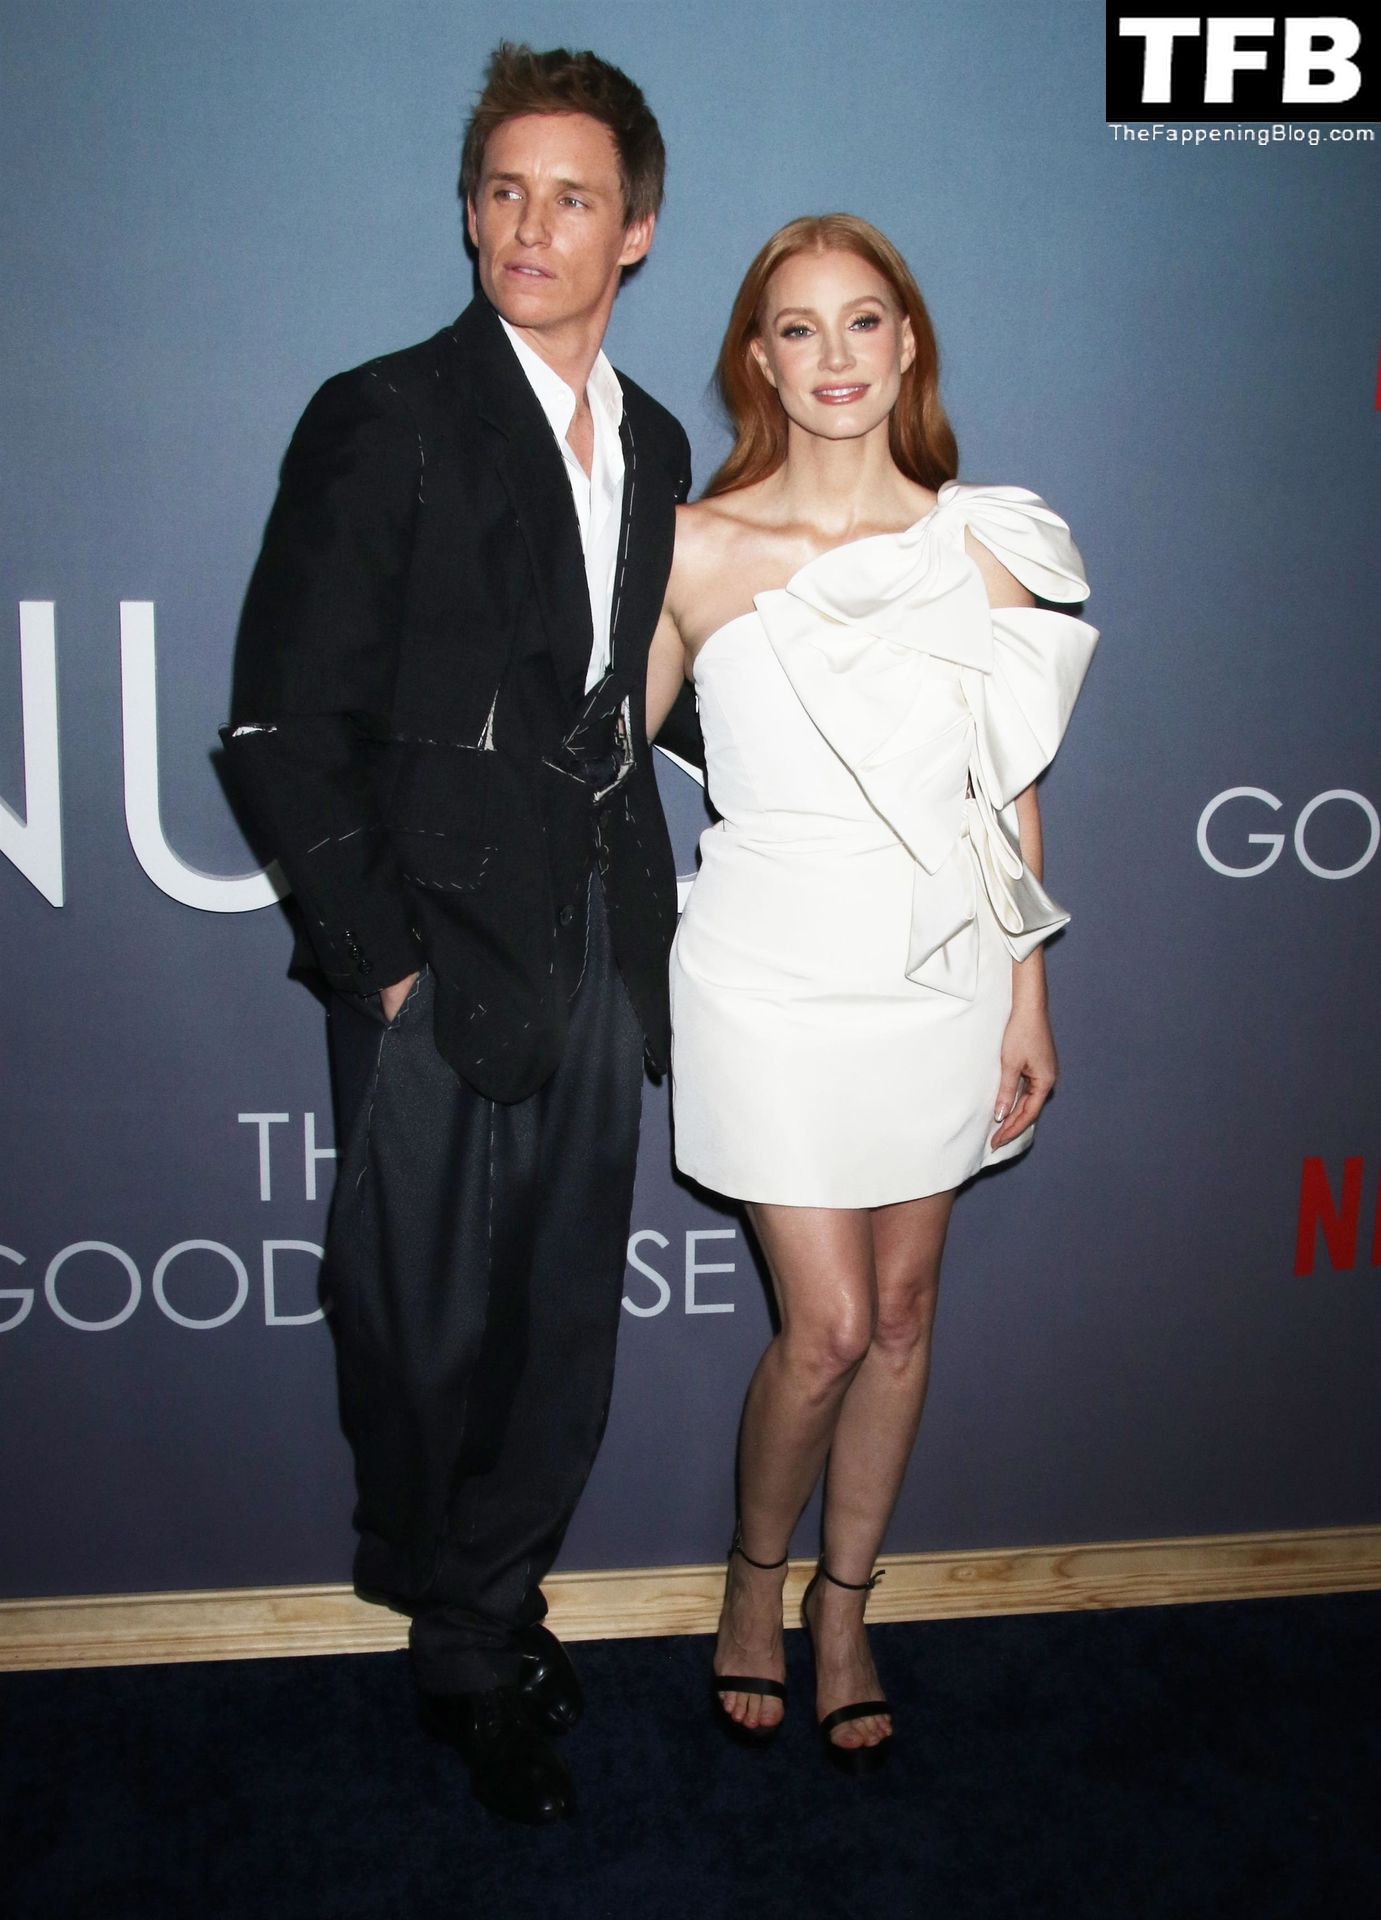 Jessica Chastain Sexy The Fappening Blog 99 1 - Jessica Chastain Flaunts Her Sexy Legs at the Netflix’s “Good Nurse” Premiere in New York (154 Photos)